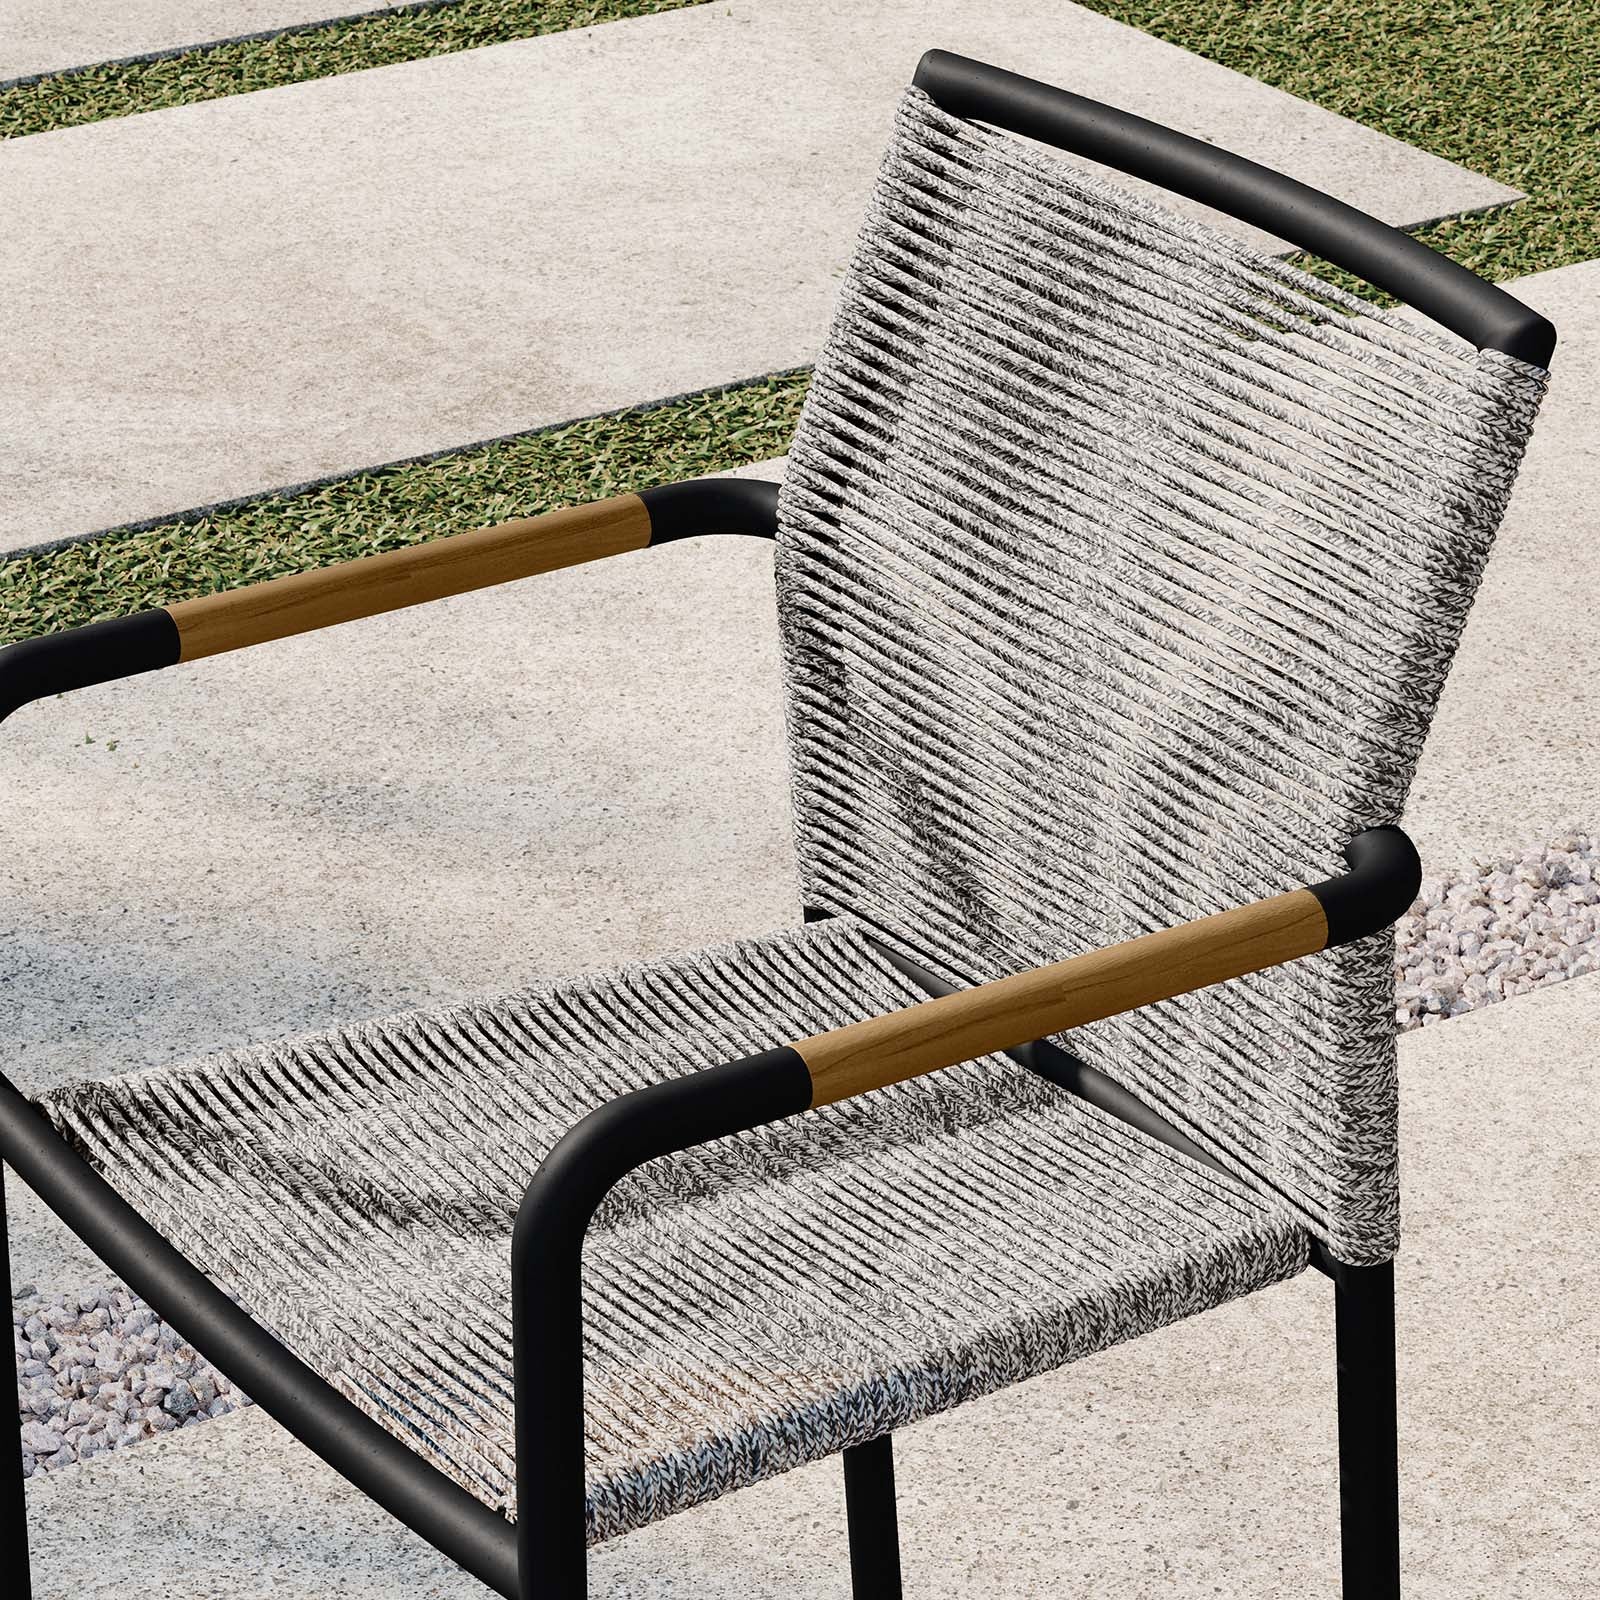 Serenity Outdoor Patio Armchairs Set of 2 - East Shore Modern Home Furnishings